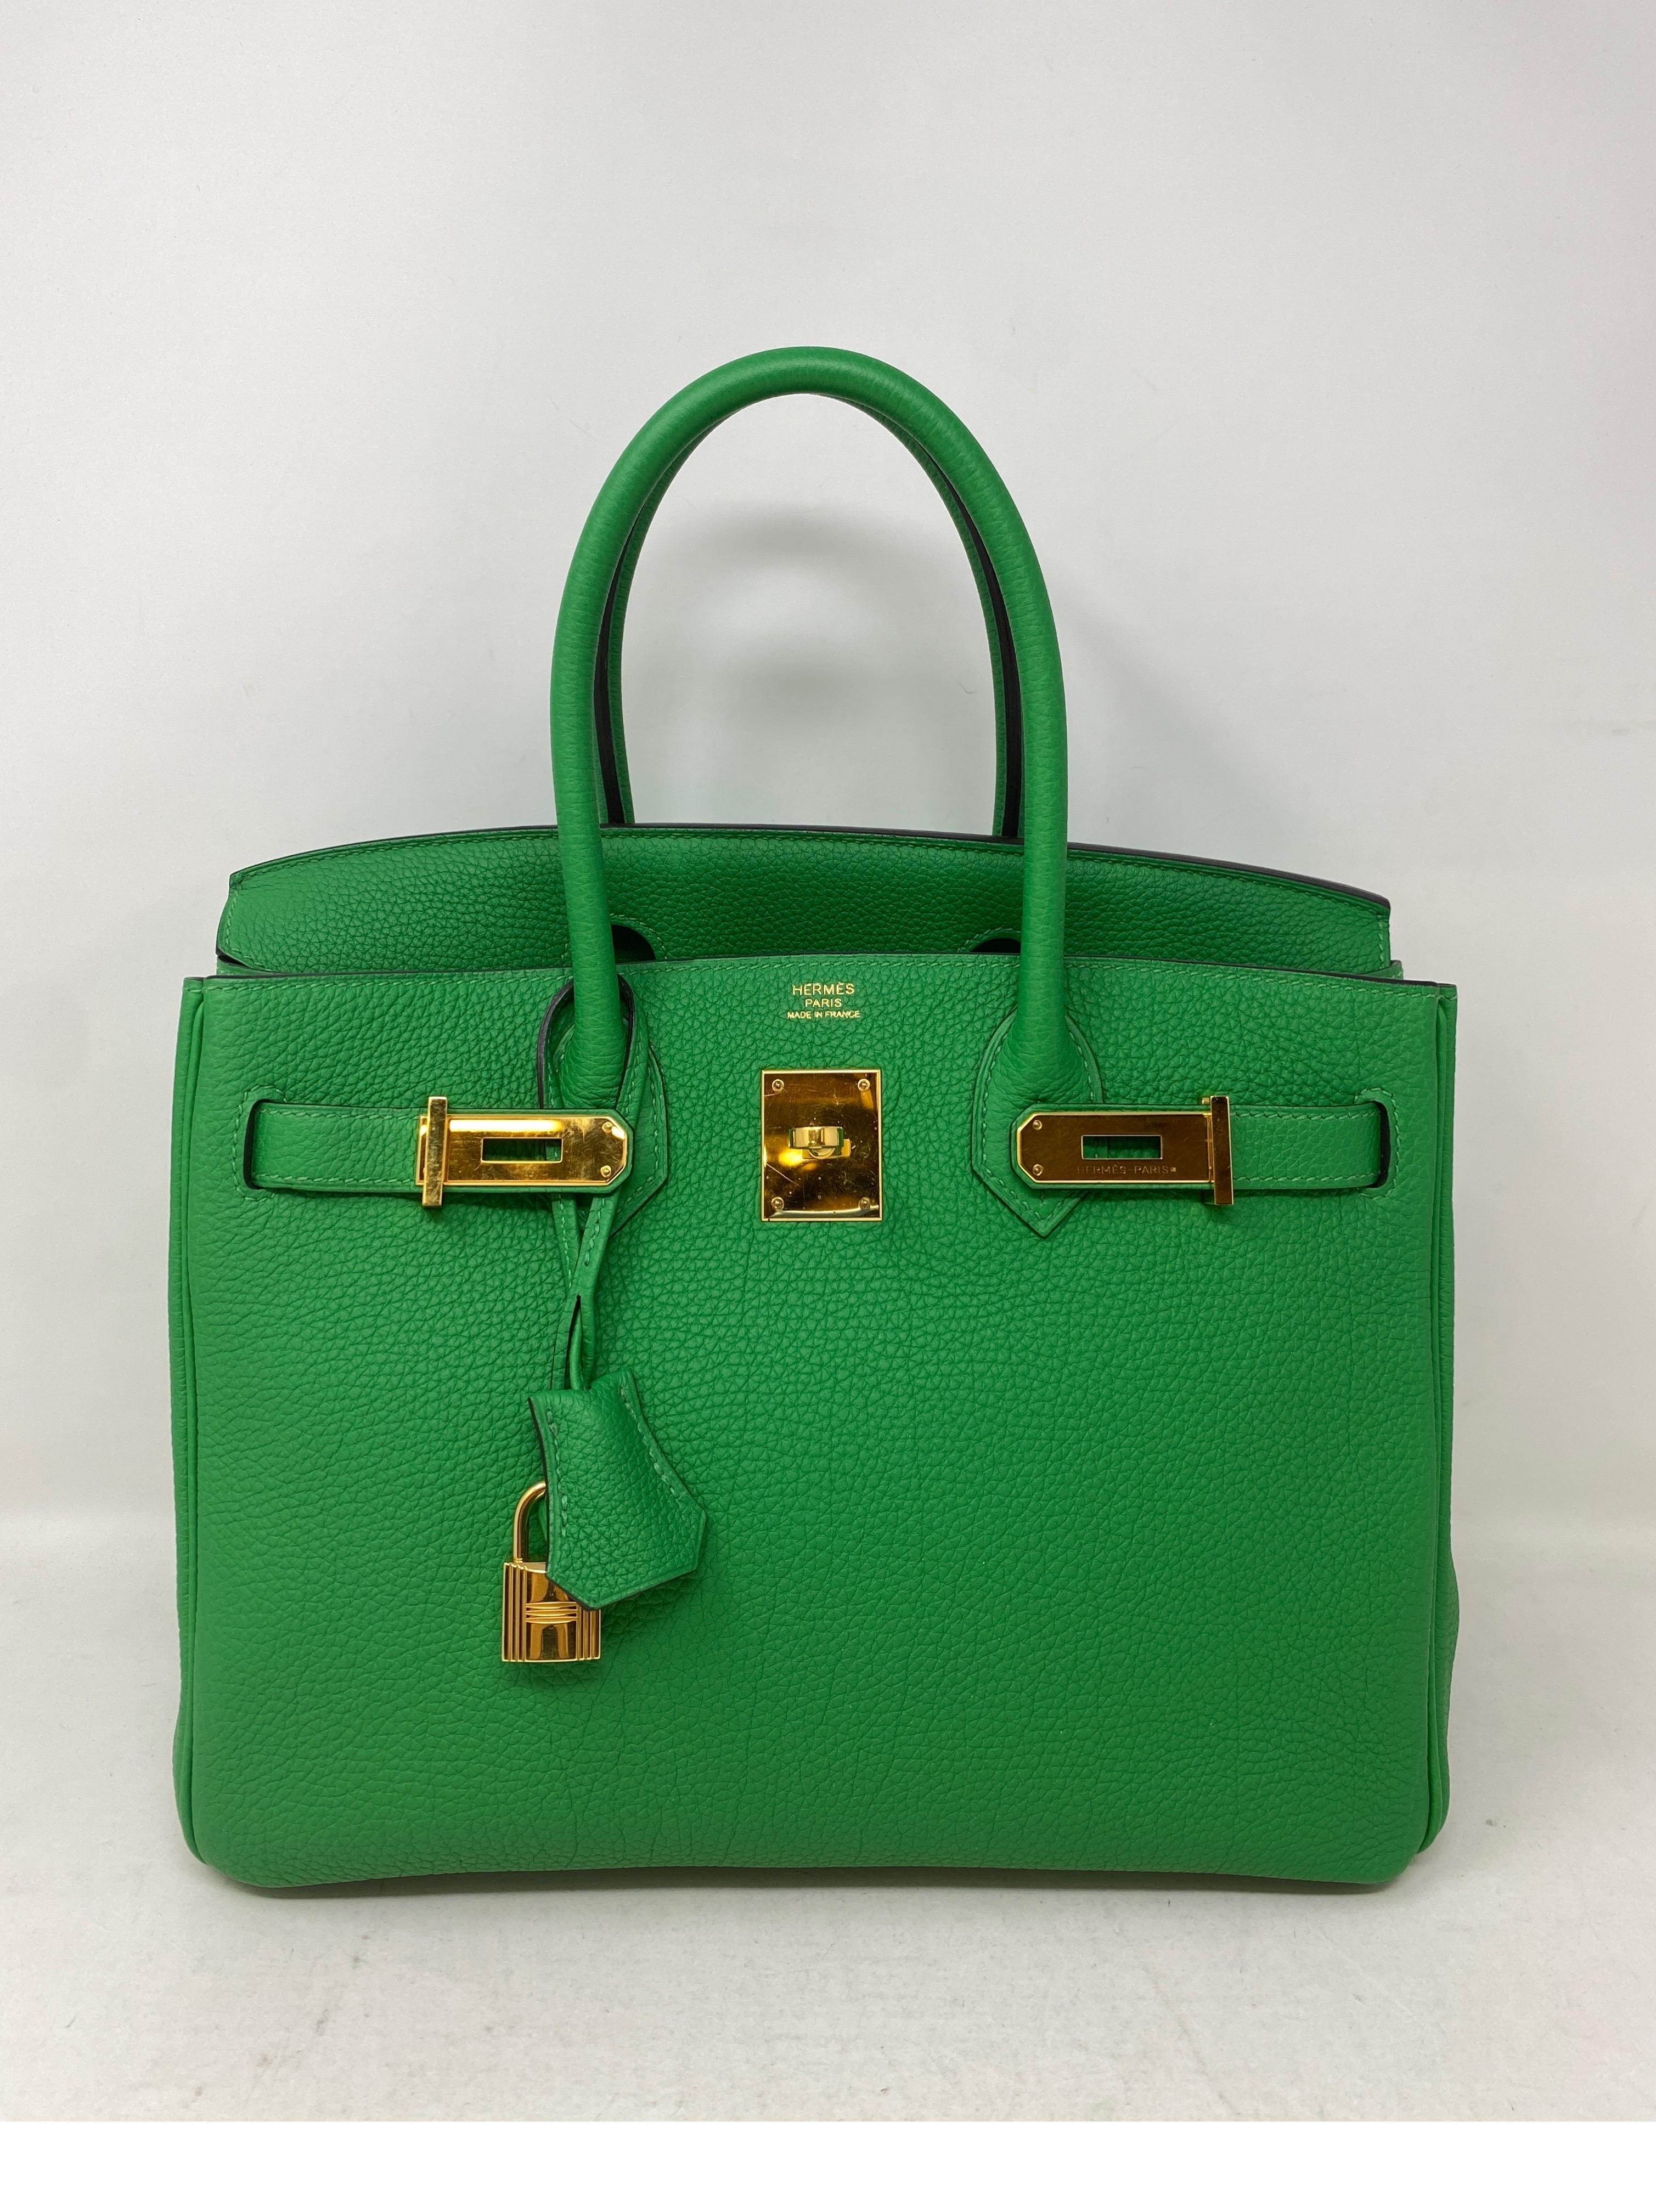 Hermes Bamboo Birkin 30 Bag. Beautiful bamboo green Birkin with gold hardware. Excellent like new condition. Togo leather. Rare combination. R square stamp. Plastic is still on the hardware. Includes clochette, lock, keys, and dust cover. Guaranteed